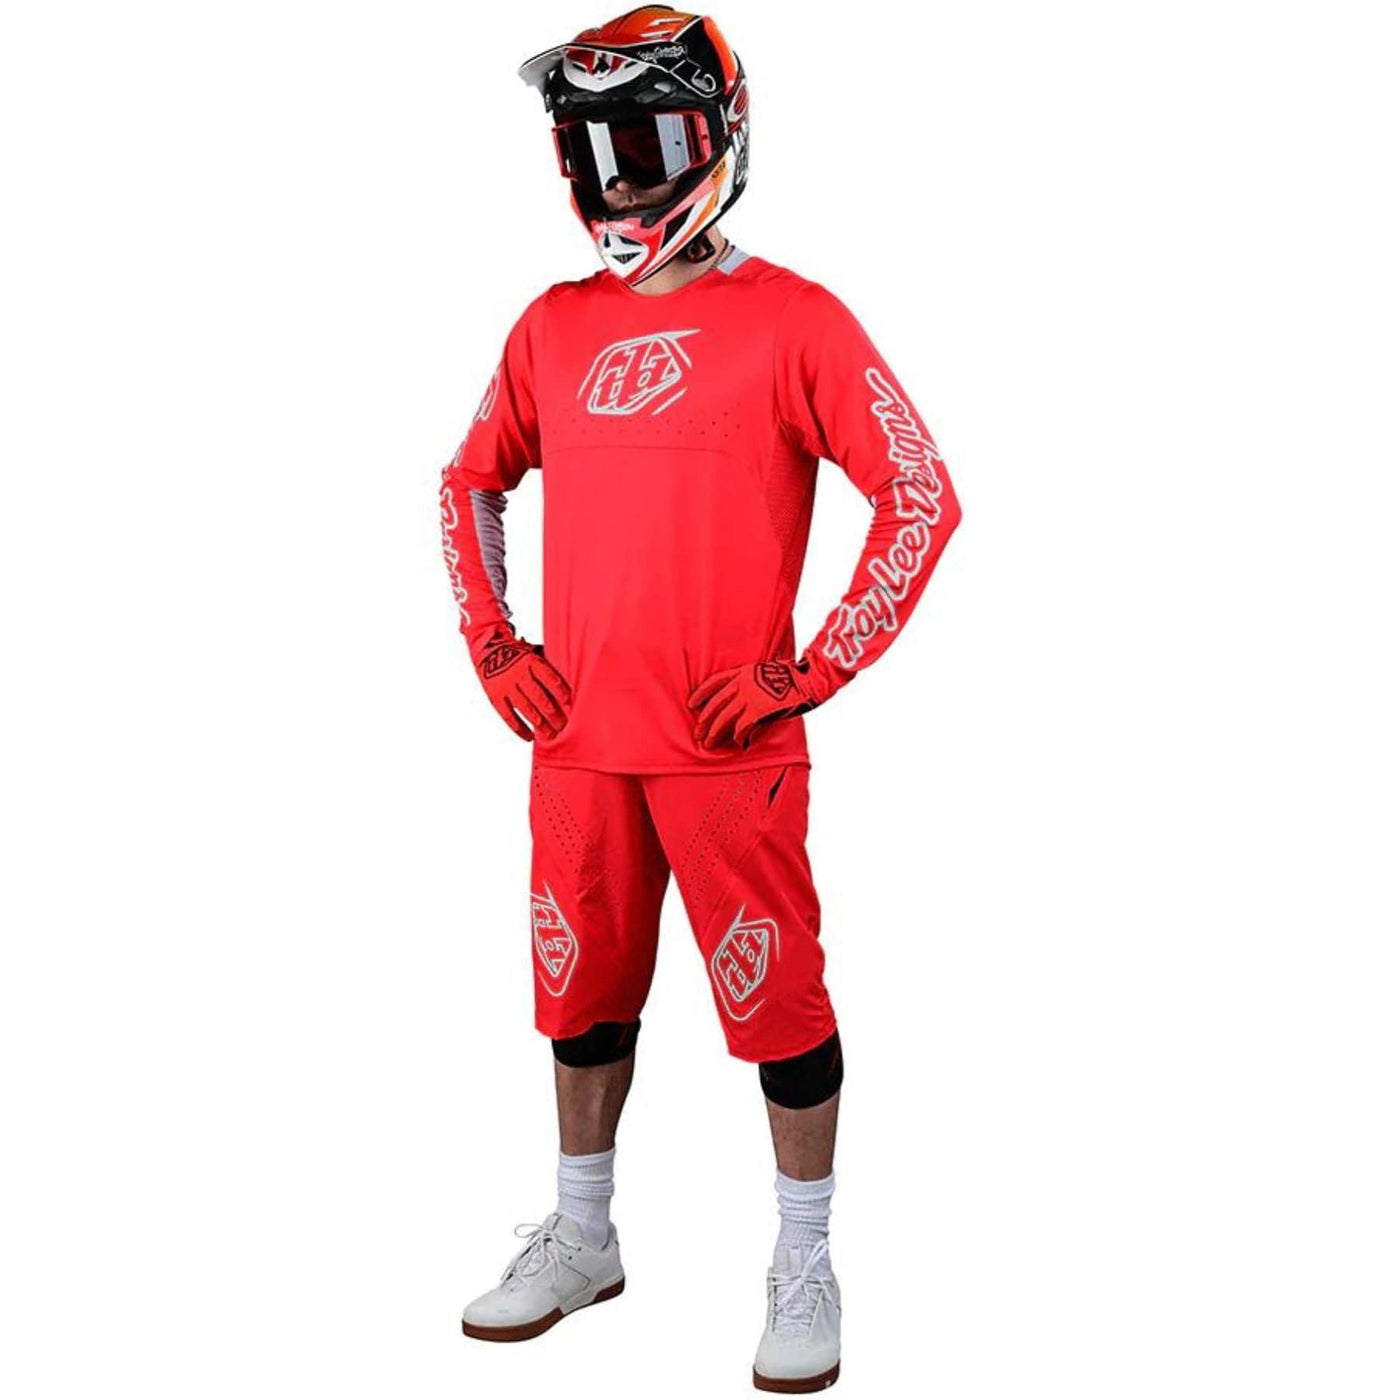 Troy Lee Designs Sprint Shorts Bike Set Mono - Race Red 8Lines Shop - Fast Shipping